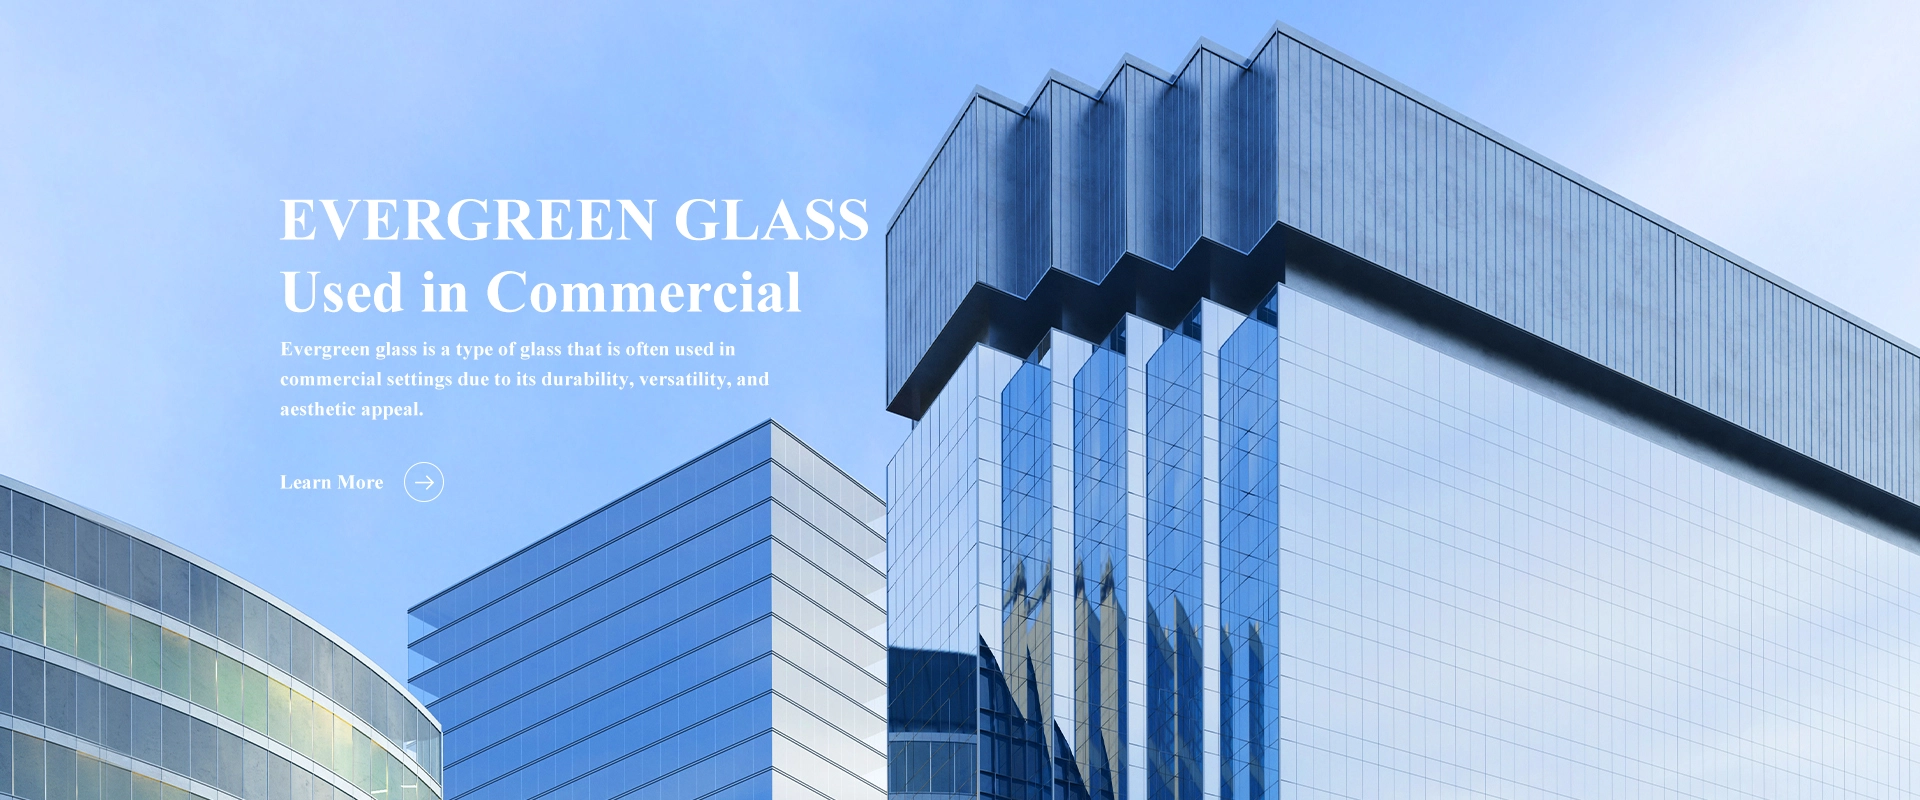 Evergreen Glass Used in Commercial